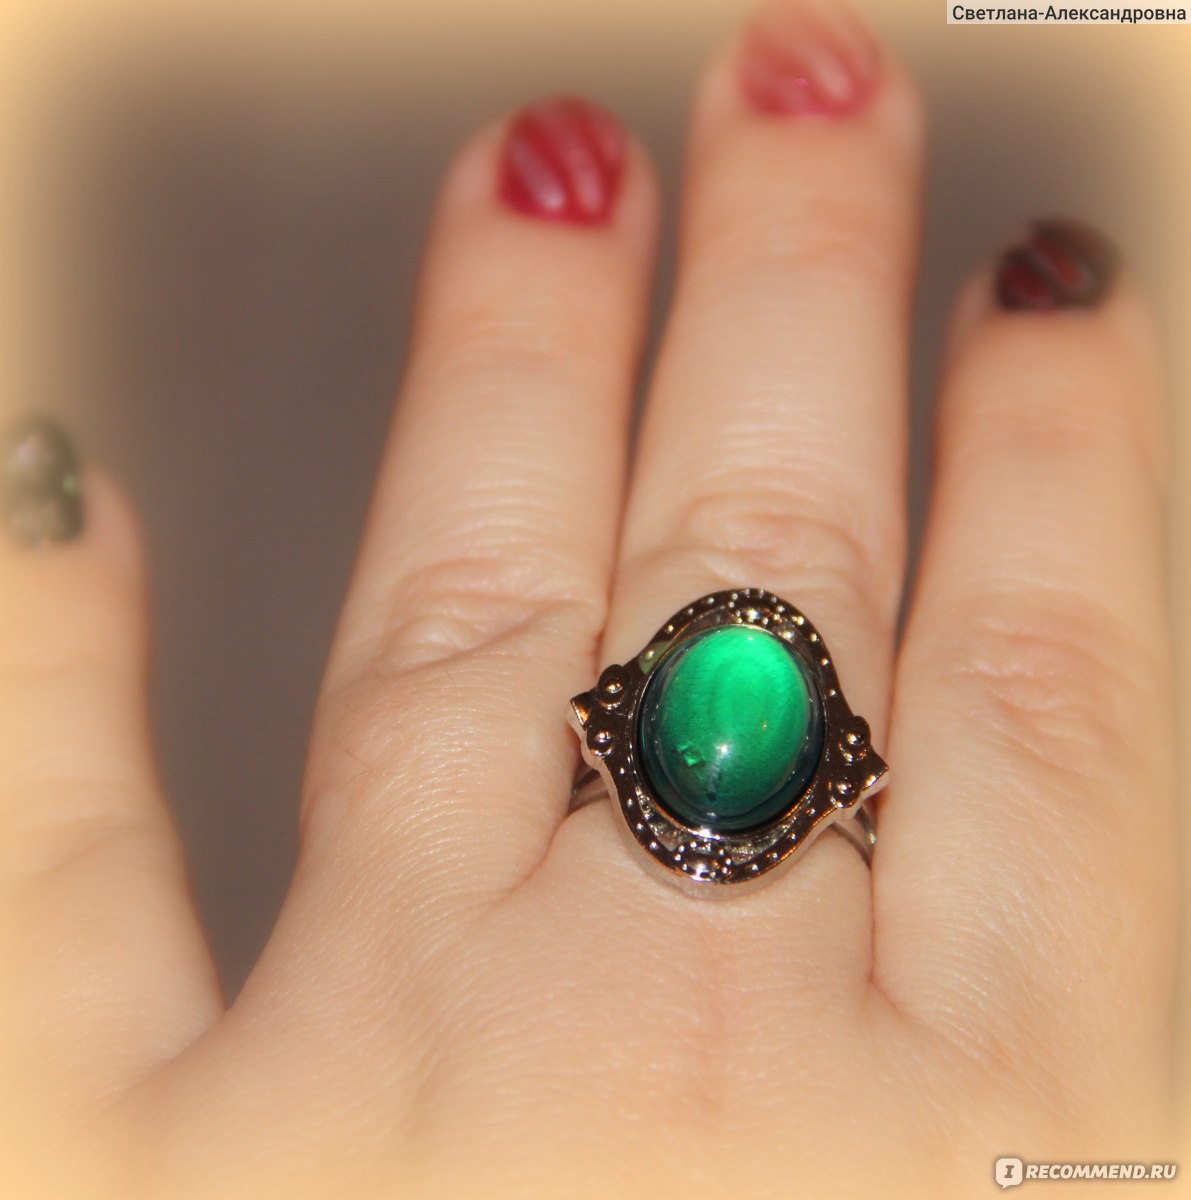 Heart changing mood stone Crystal stone Jade ring Evil eye ring jewelry